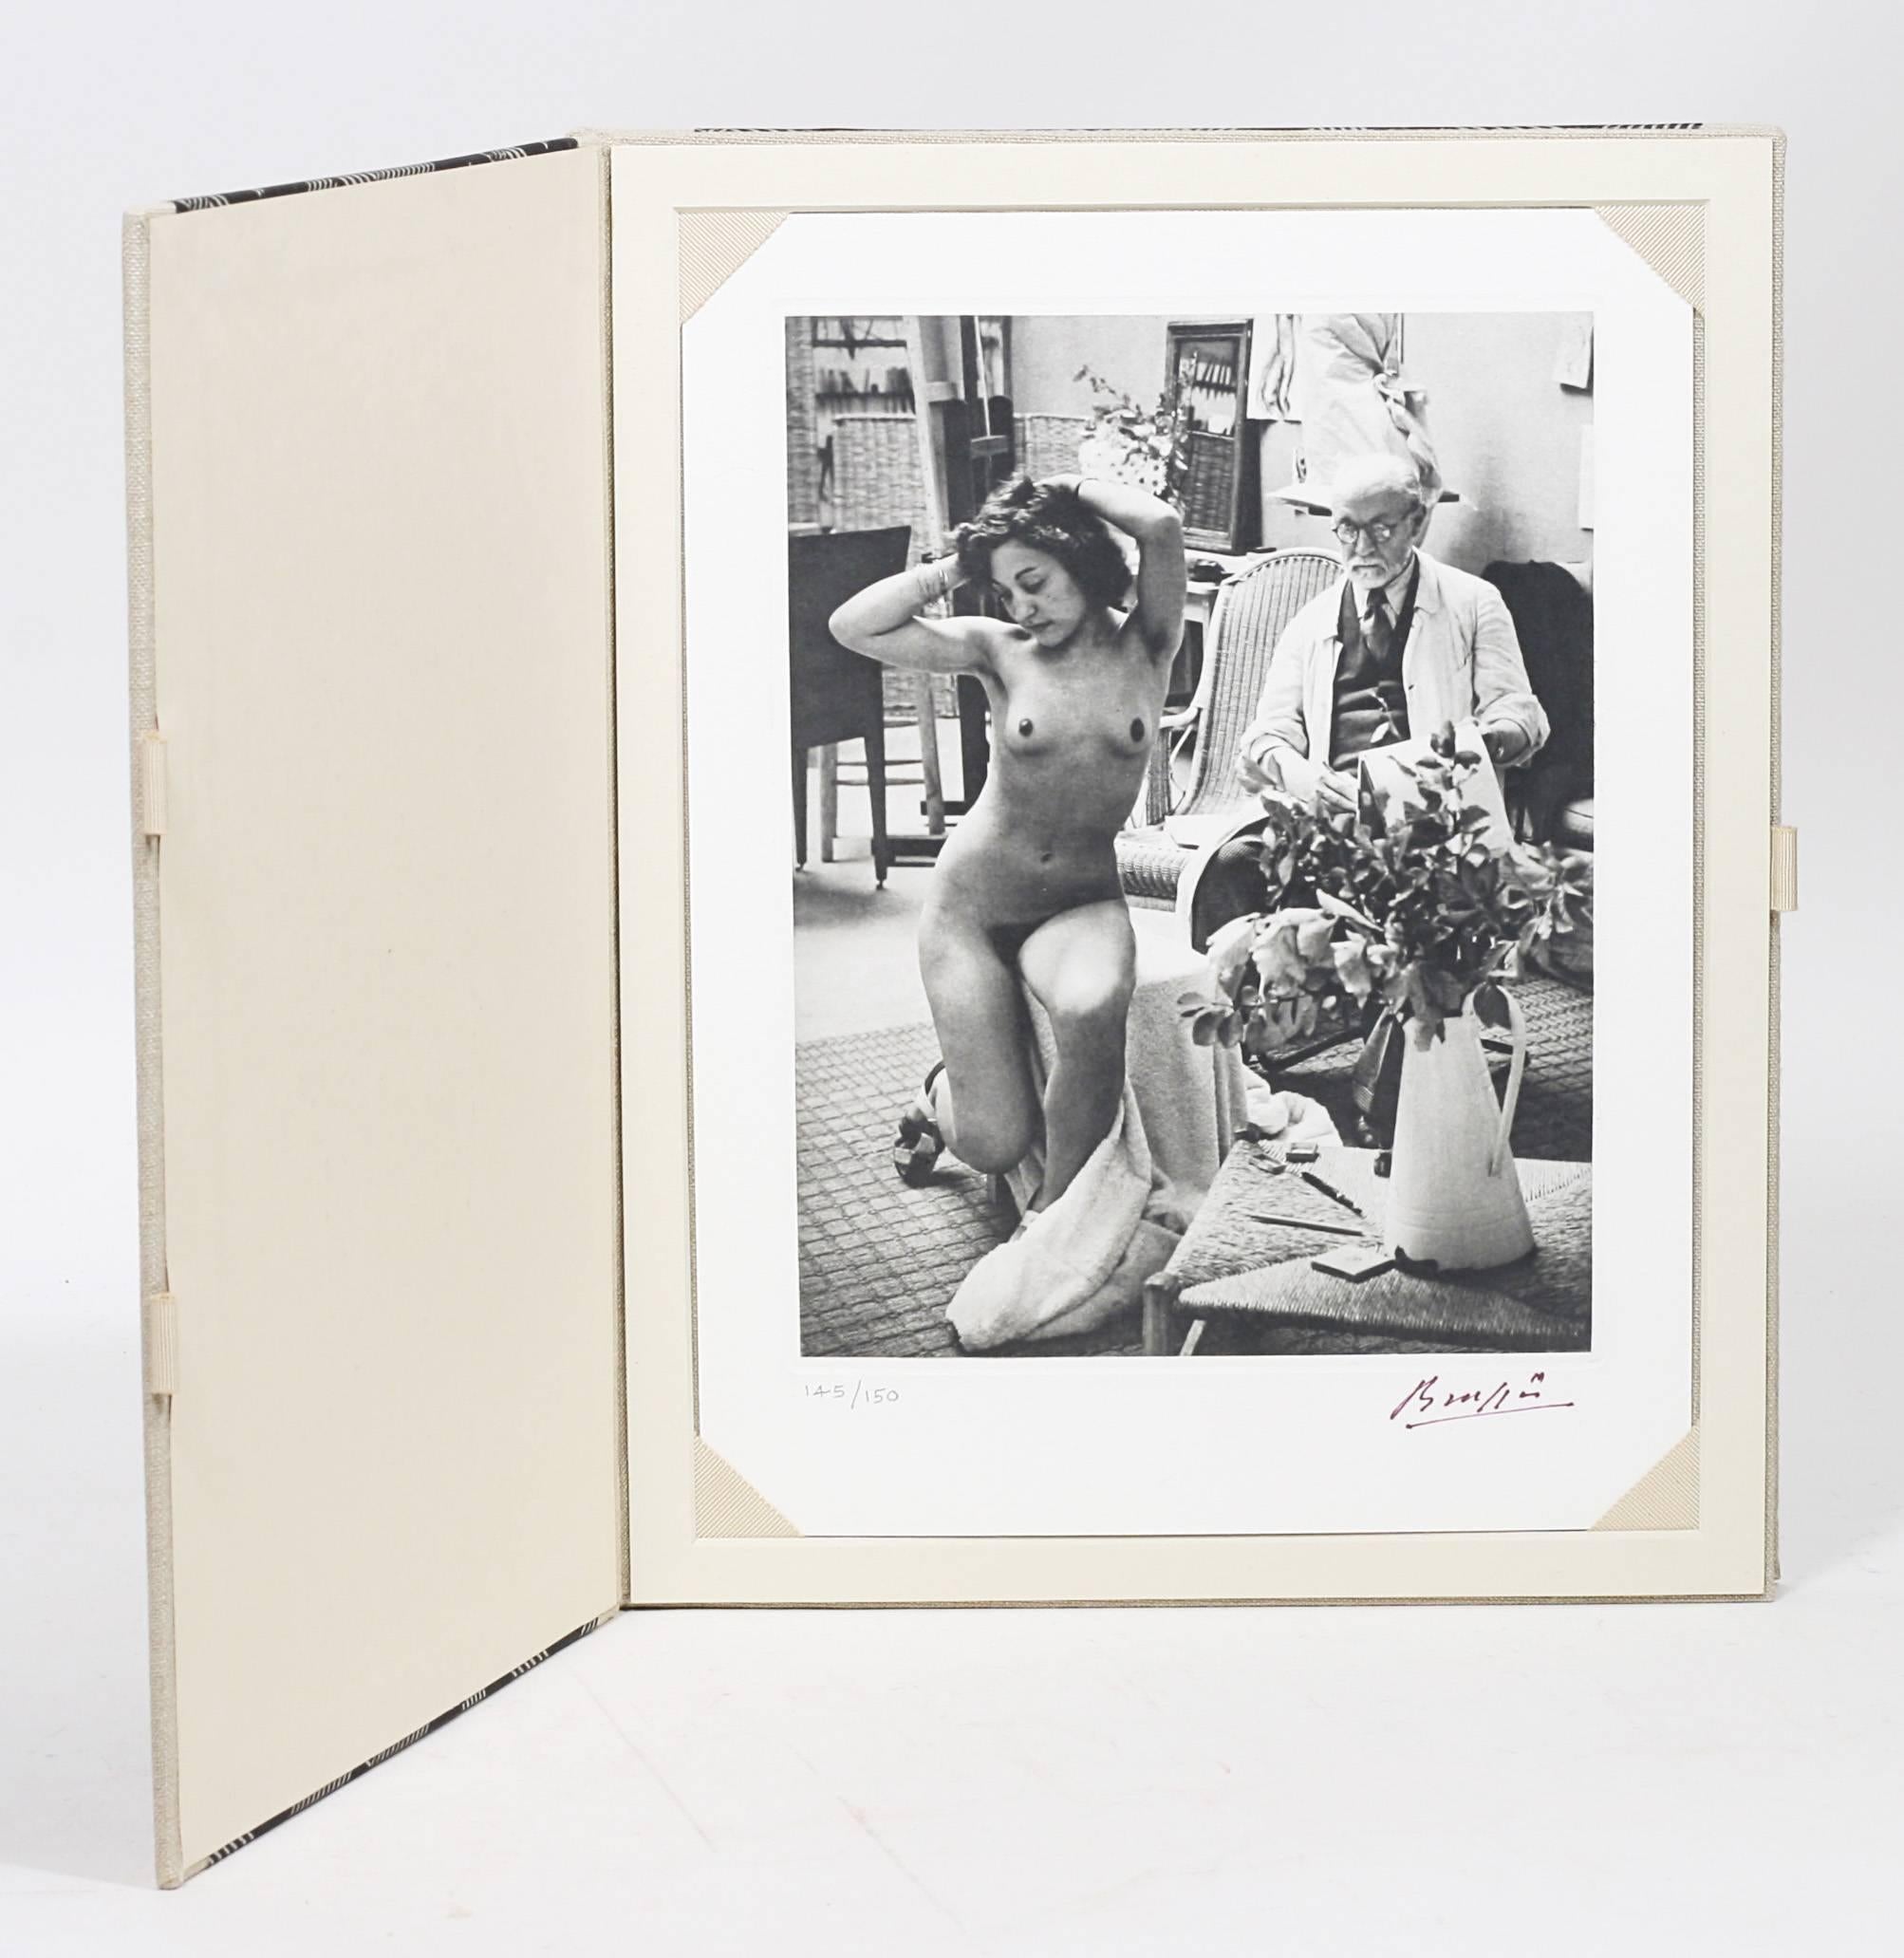 Rare Deluxe signed limited First edition, one of only 150 copies, Signed and numbered by Brassai and with a Signed hand-pulled gravure, “Matisse Drawing from the Nude”. Additionally illustrated throughout with images of the subjects and works